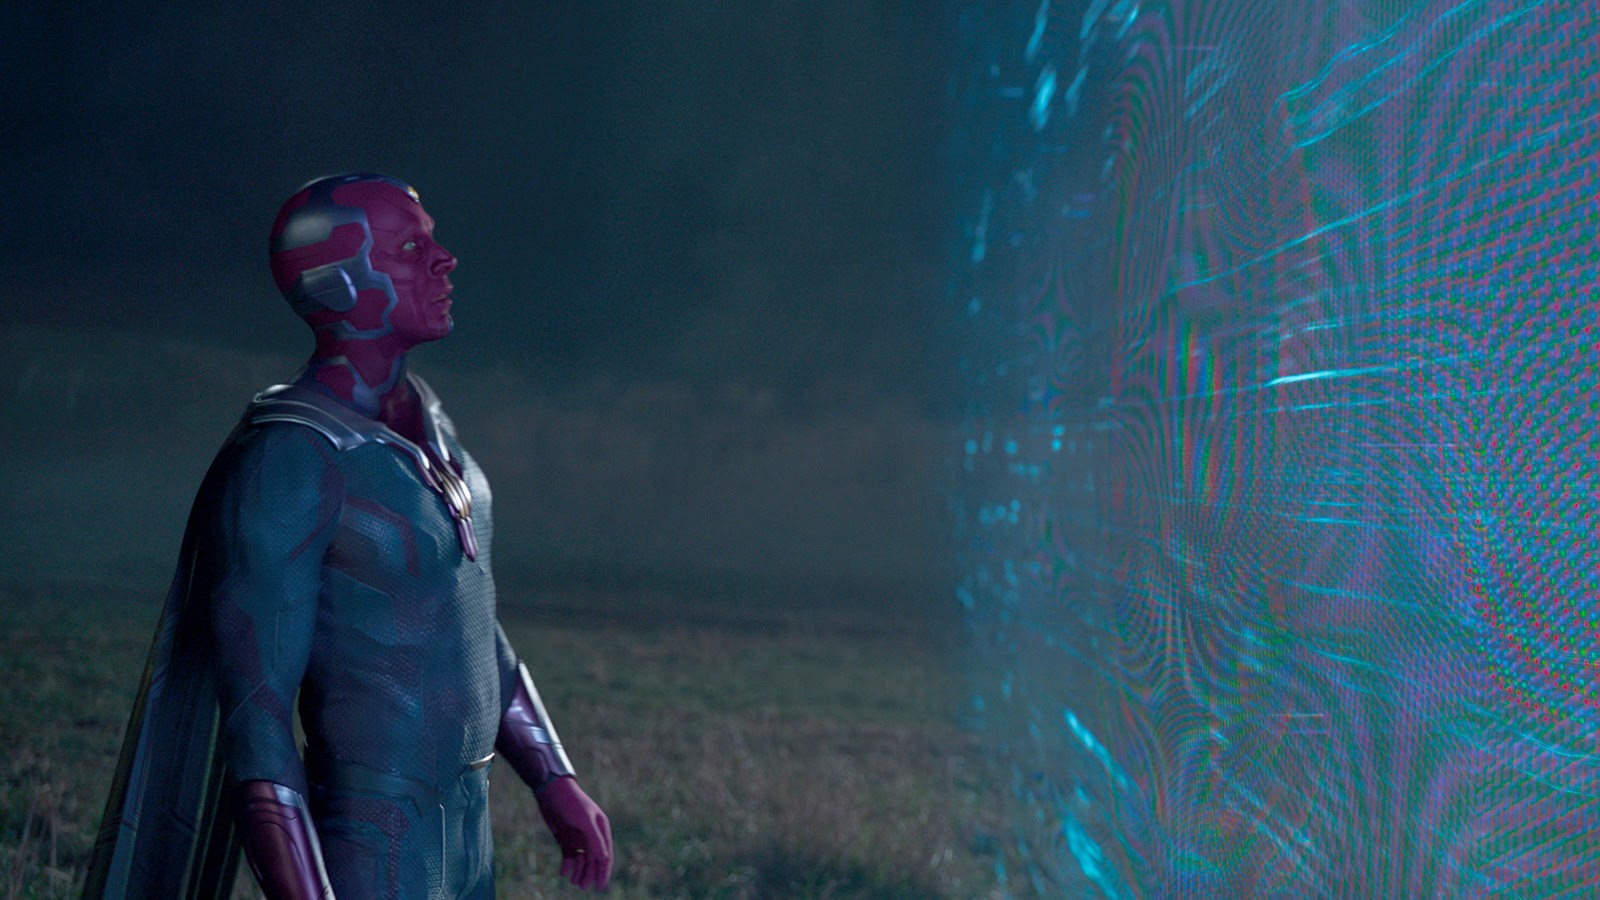 Vision tries to leave The Hex